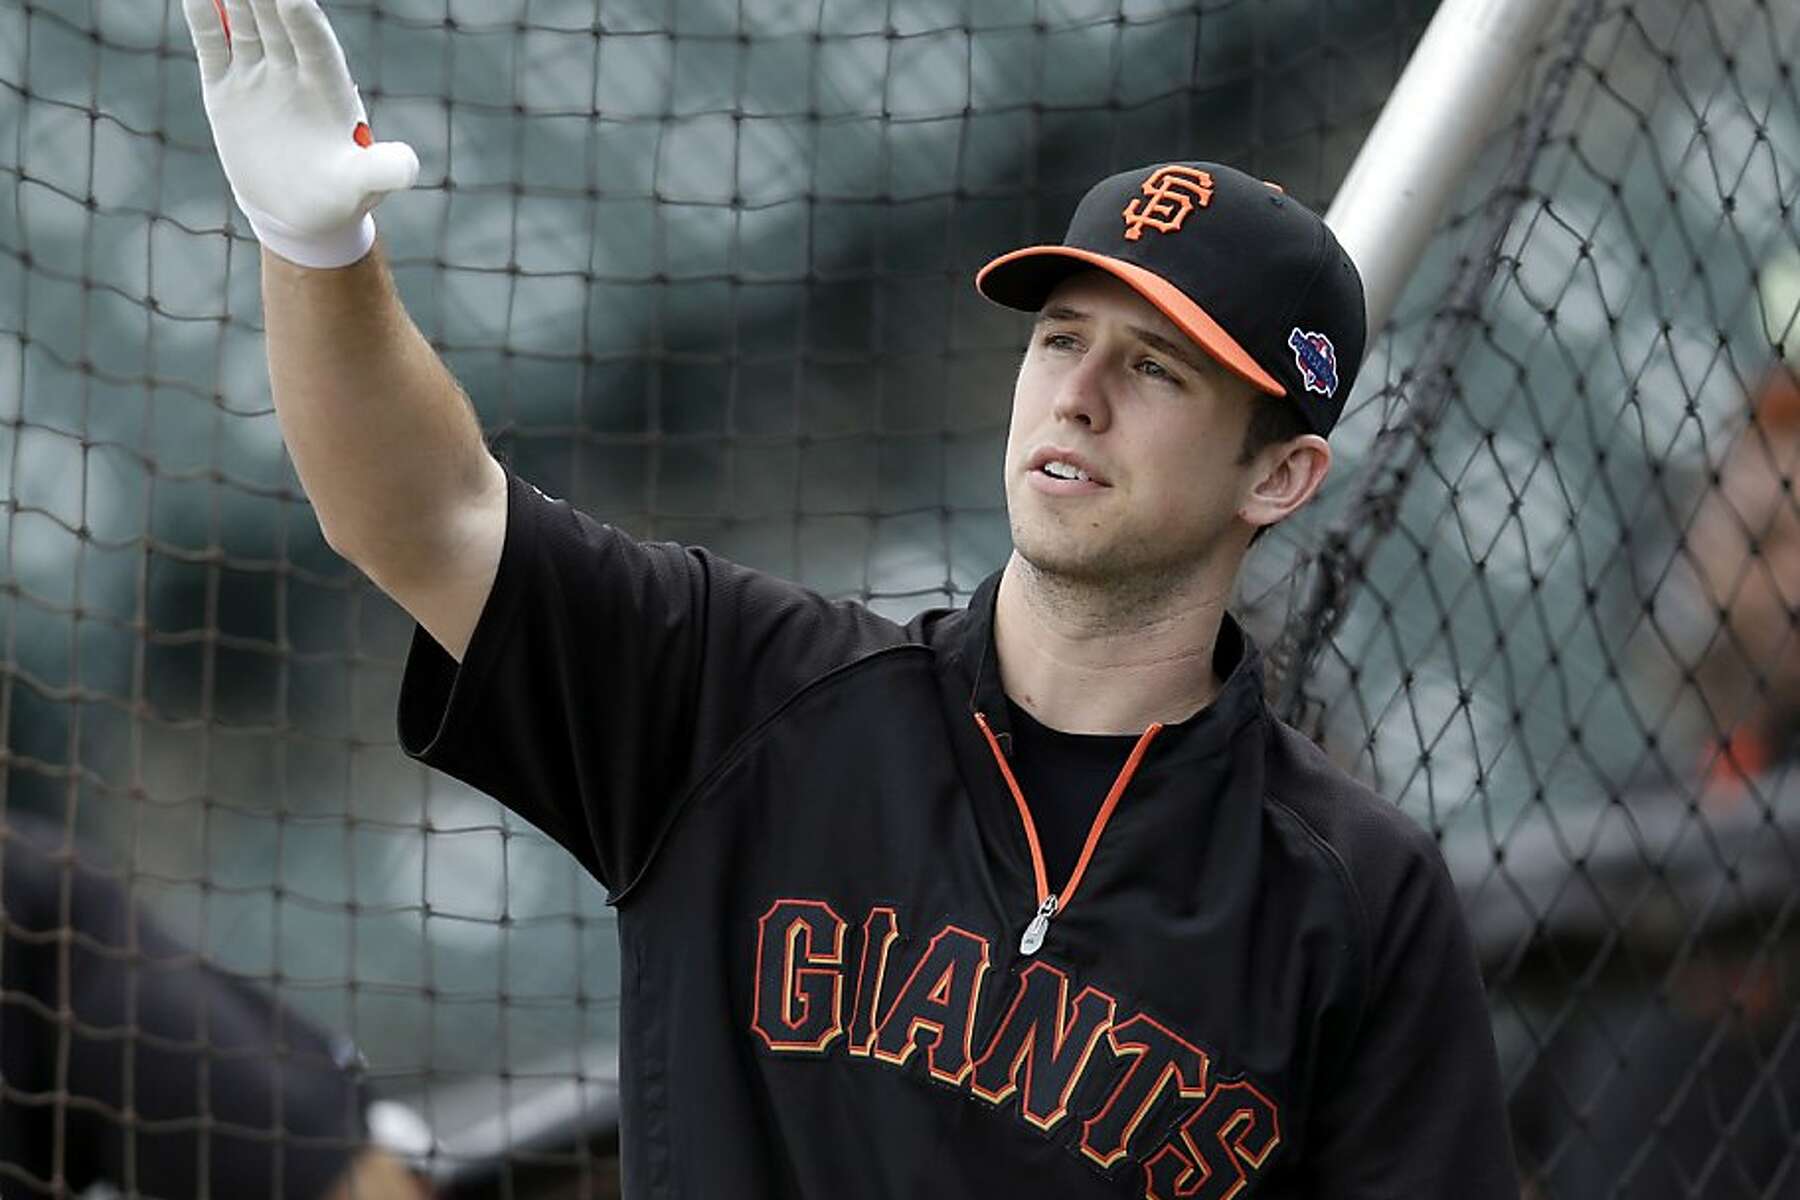 Bruce Bochy says Buster Posey will still catch Tim Lincecum 